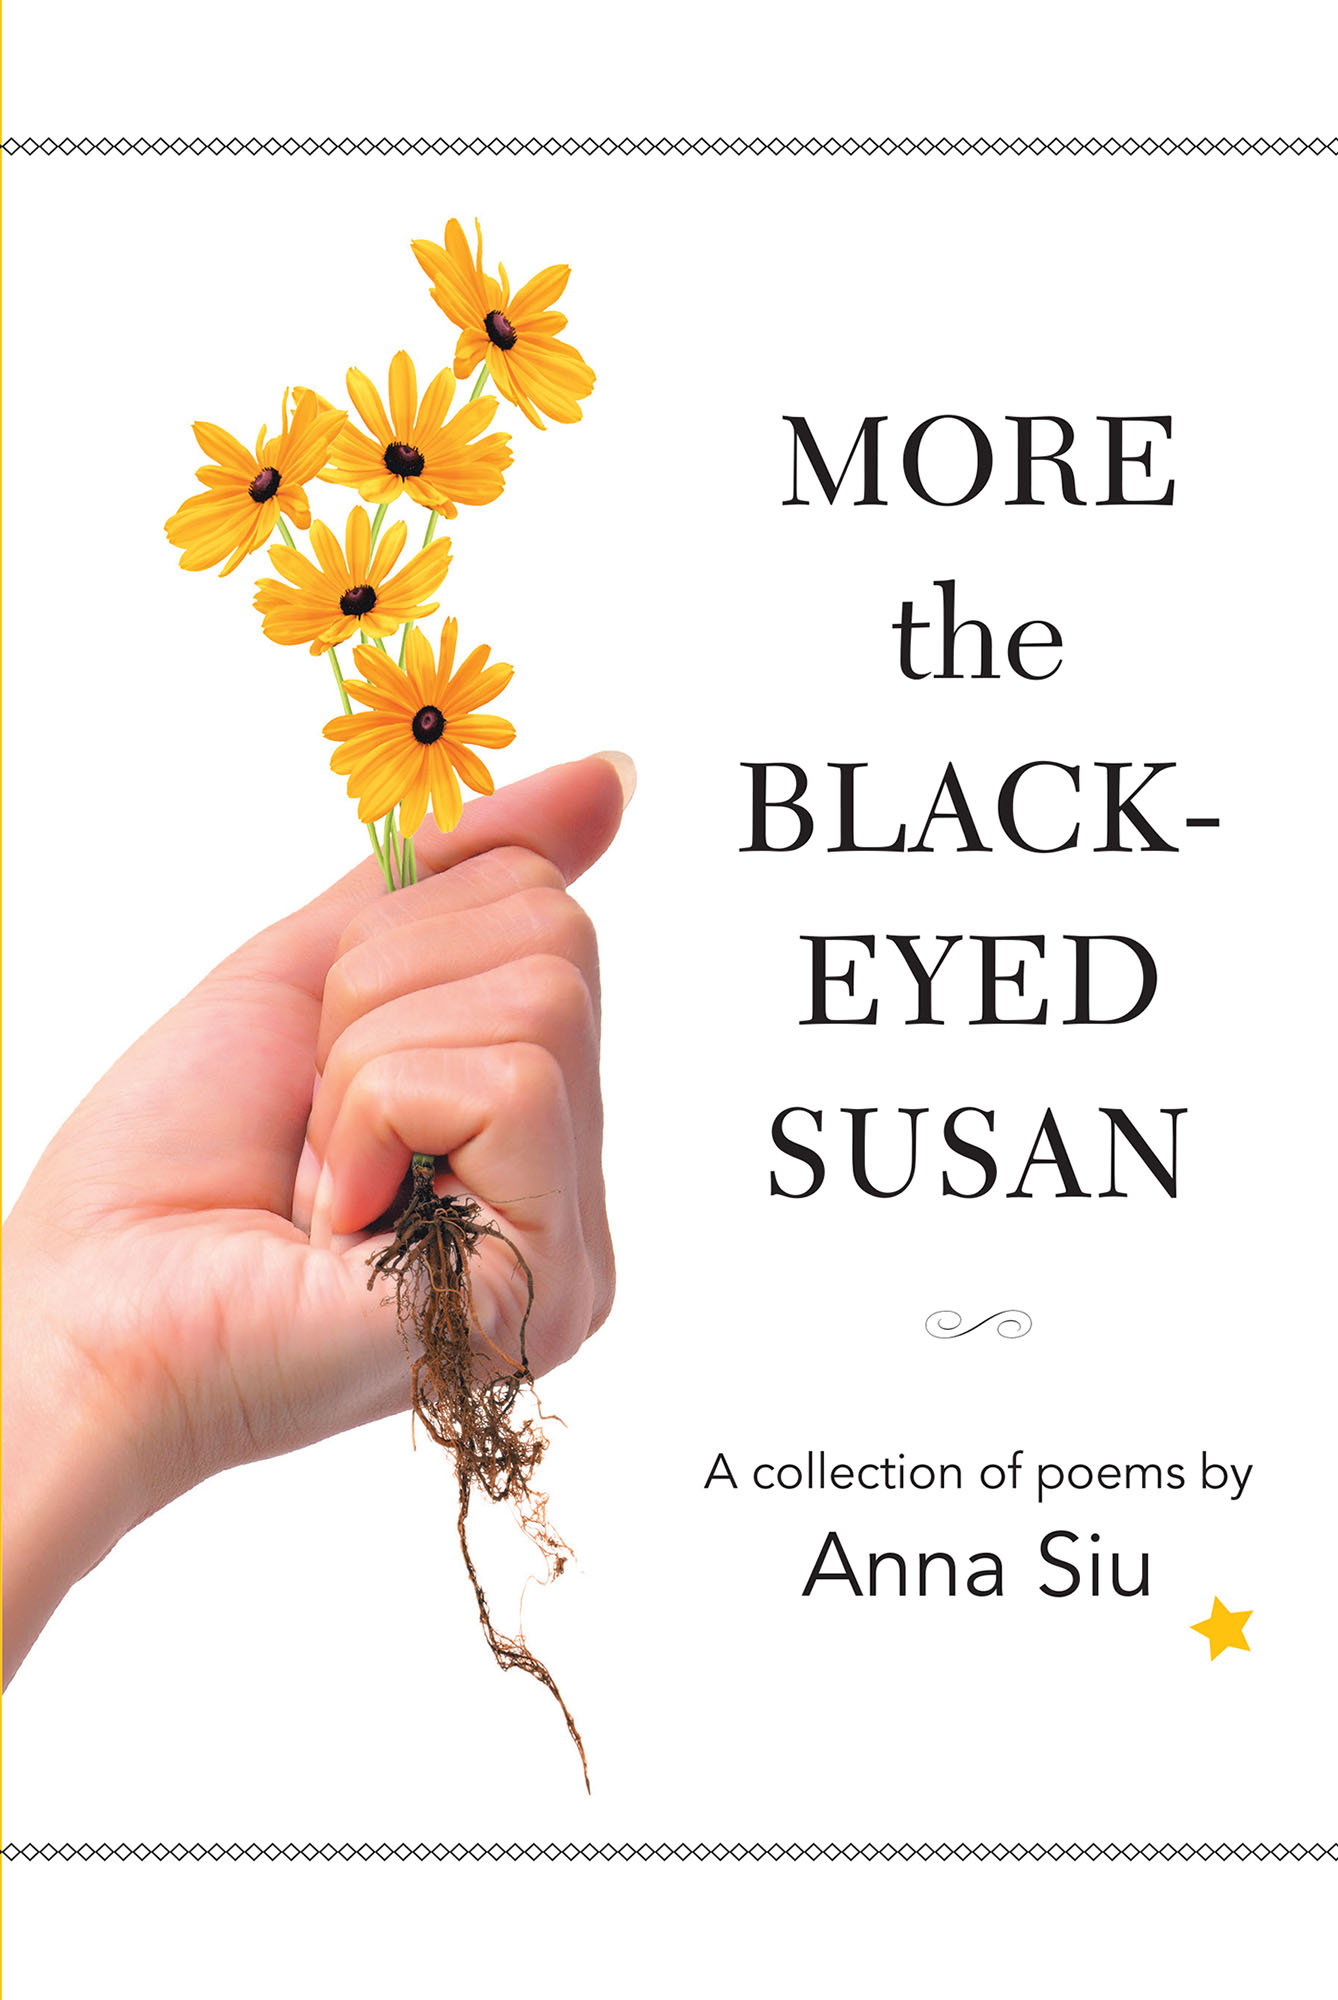 Anna Siu’s New Book “More the BlackEyed Susan” is a Collection of